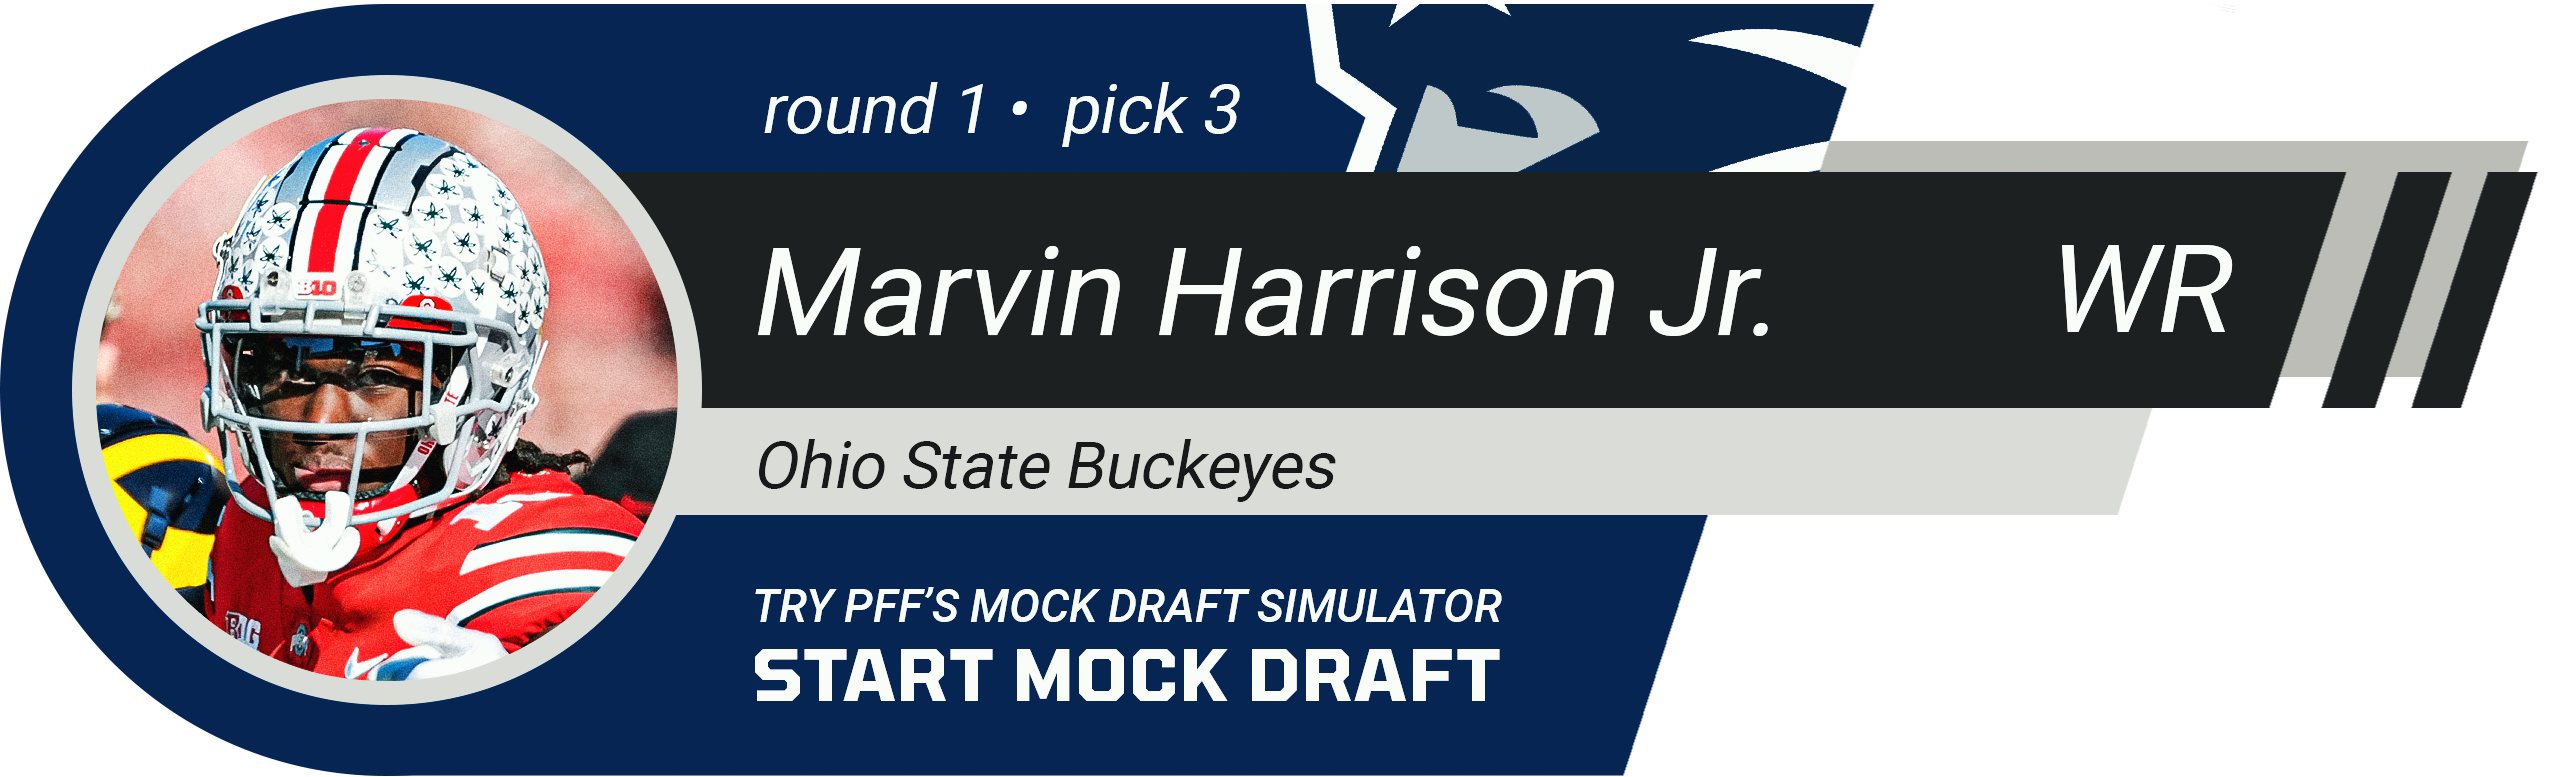 3. New England Patriots: WR Marvin Harrison Jr., Ohio State